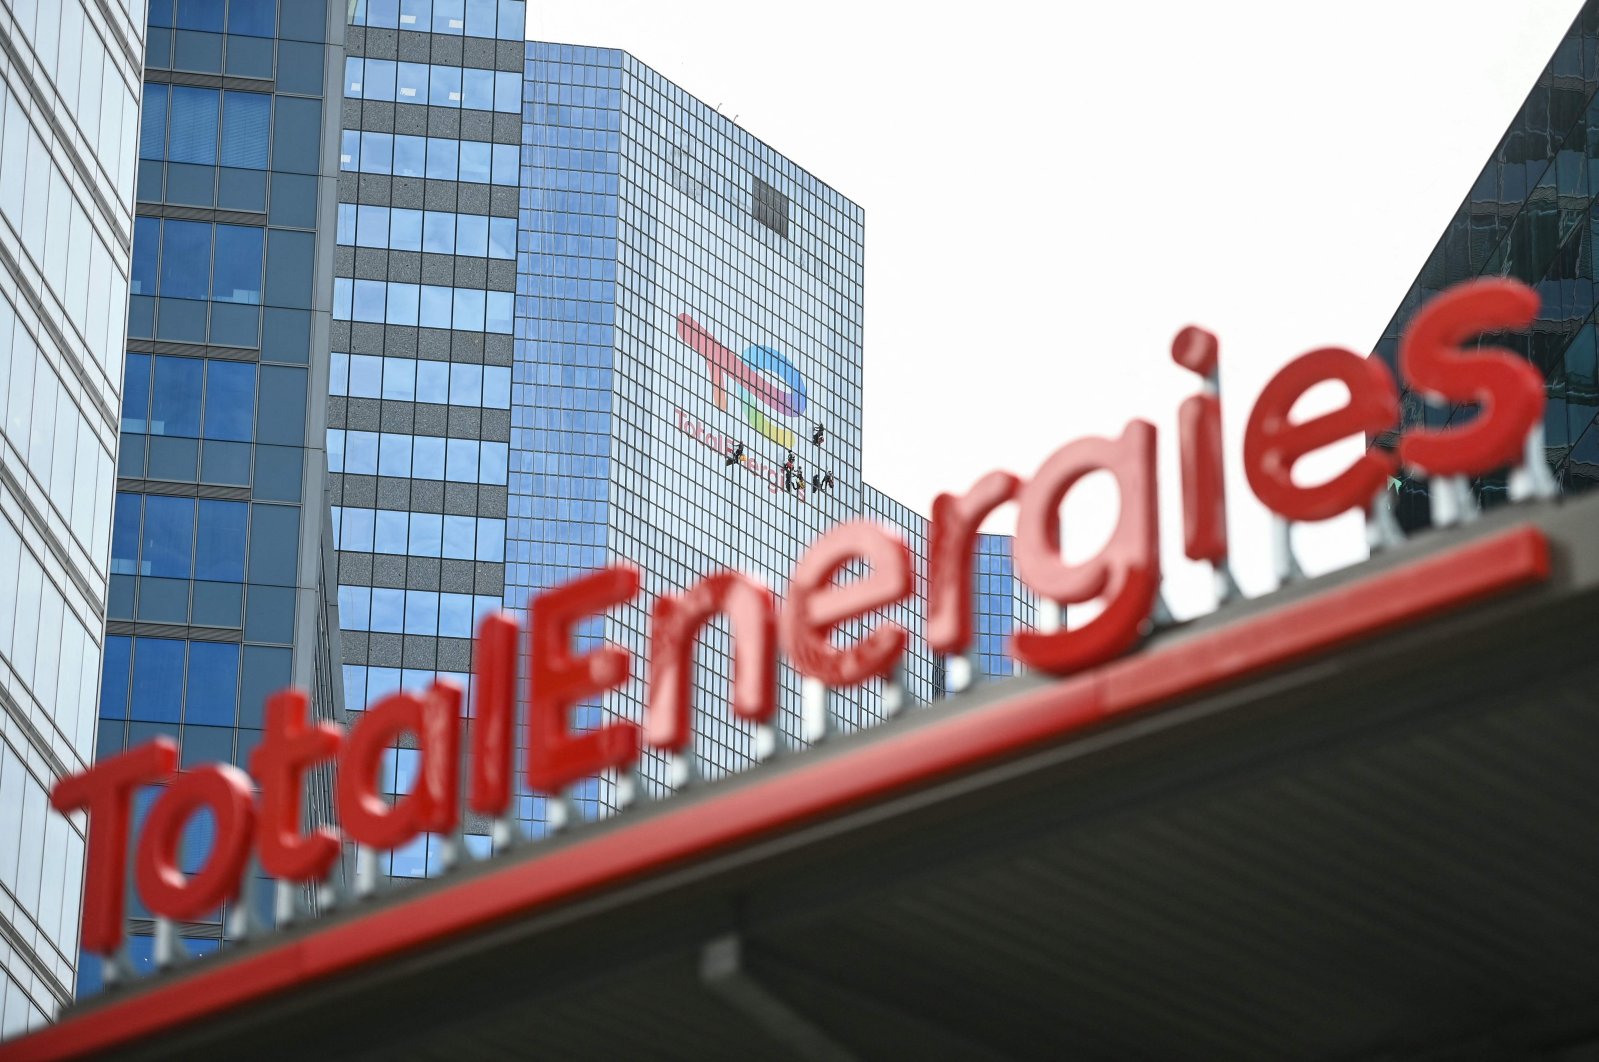 The new TotalEnergies logo is seen during its unveling ceremony, at a charging station in La Defense on the outskirts of Paris, France, May 28, 2021. (AFP Photo)